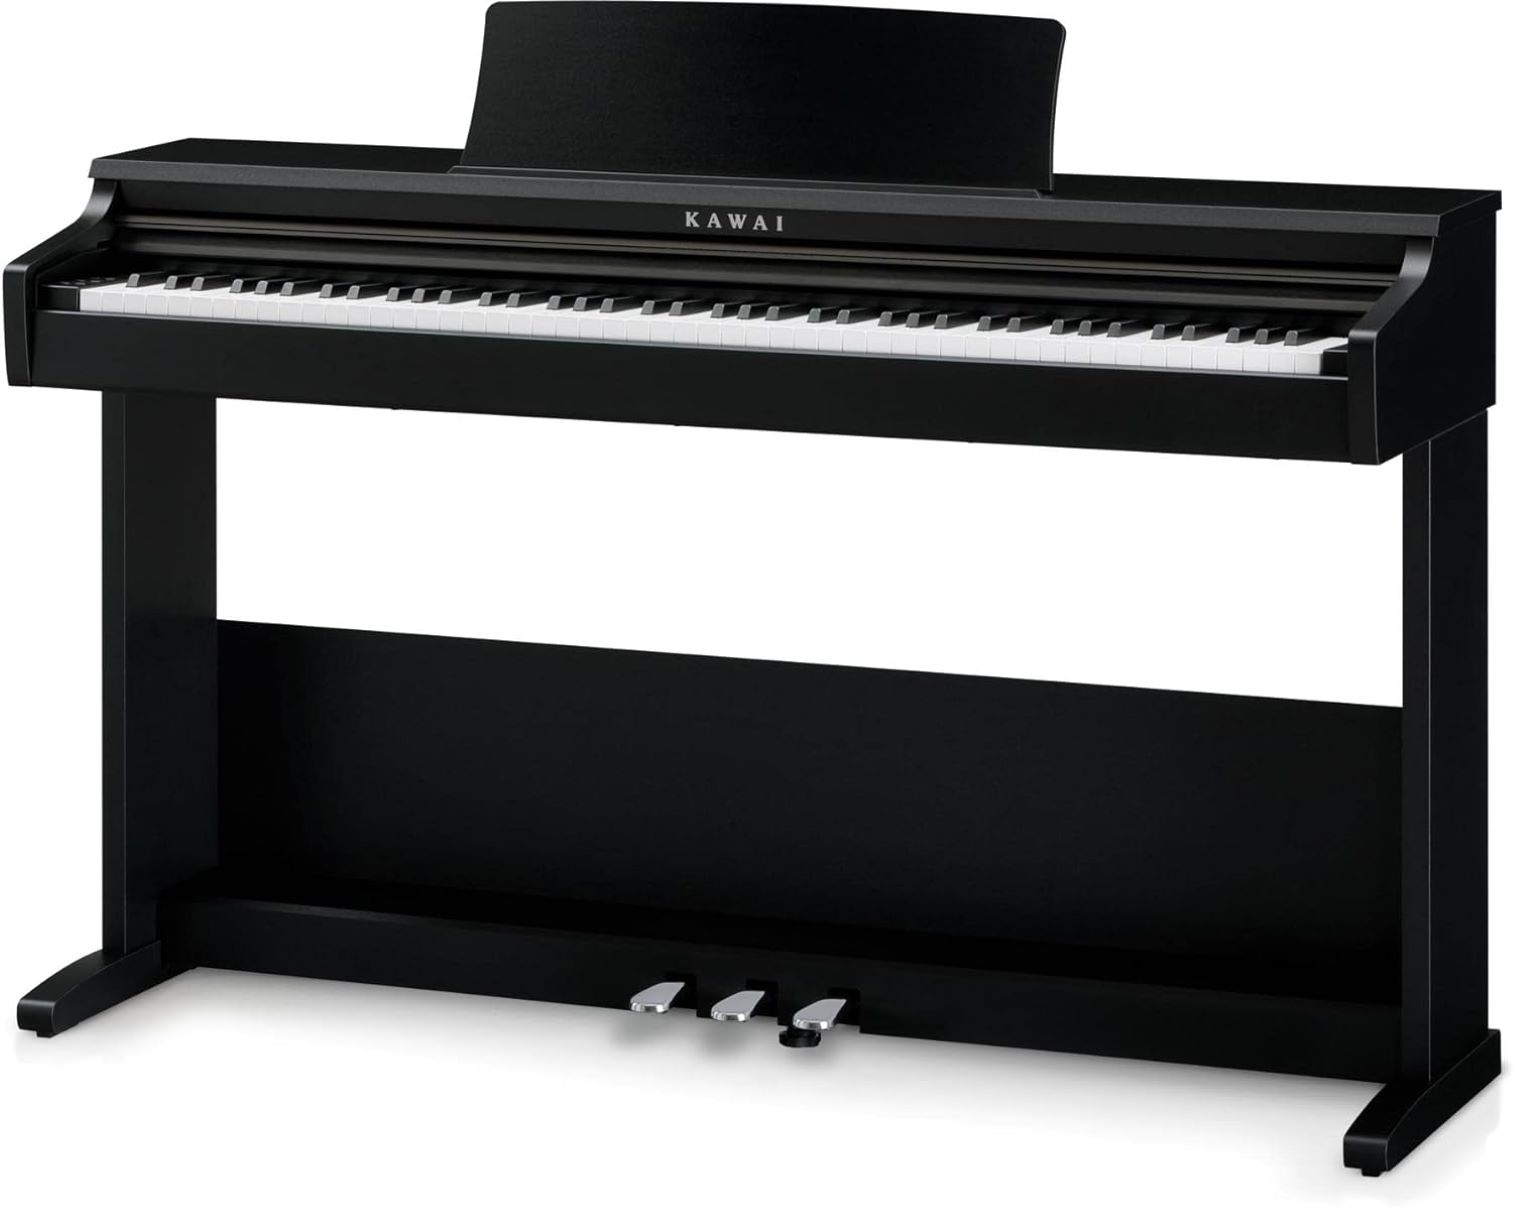 Why Doesn’t Guitar Center Have Kawai Digital Pianos In Stores